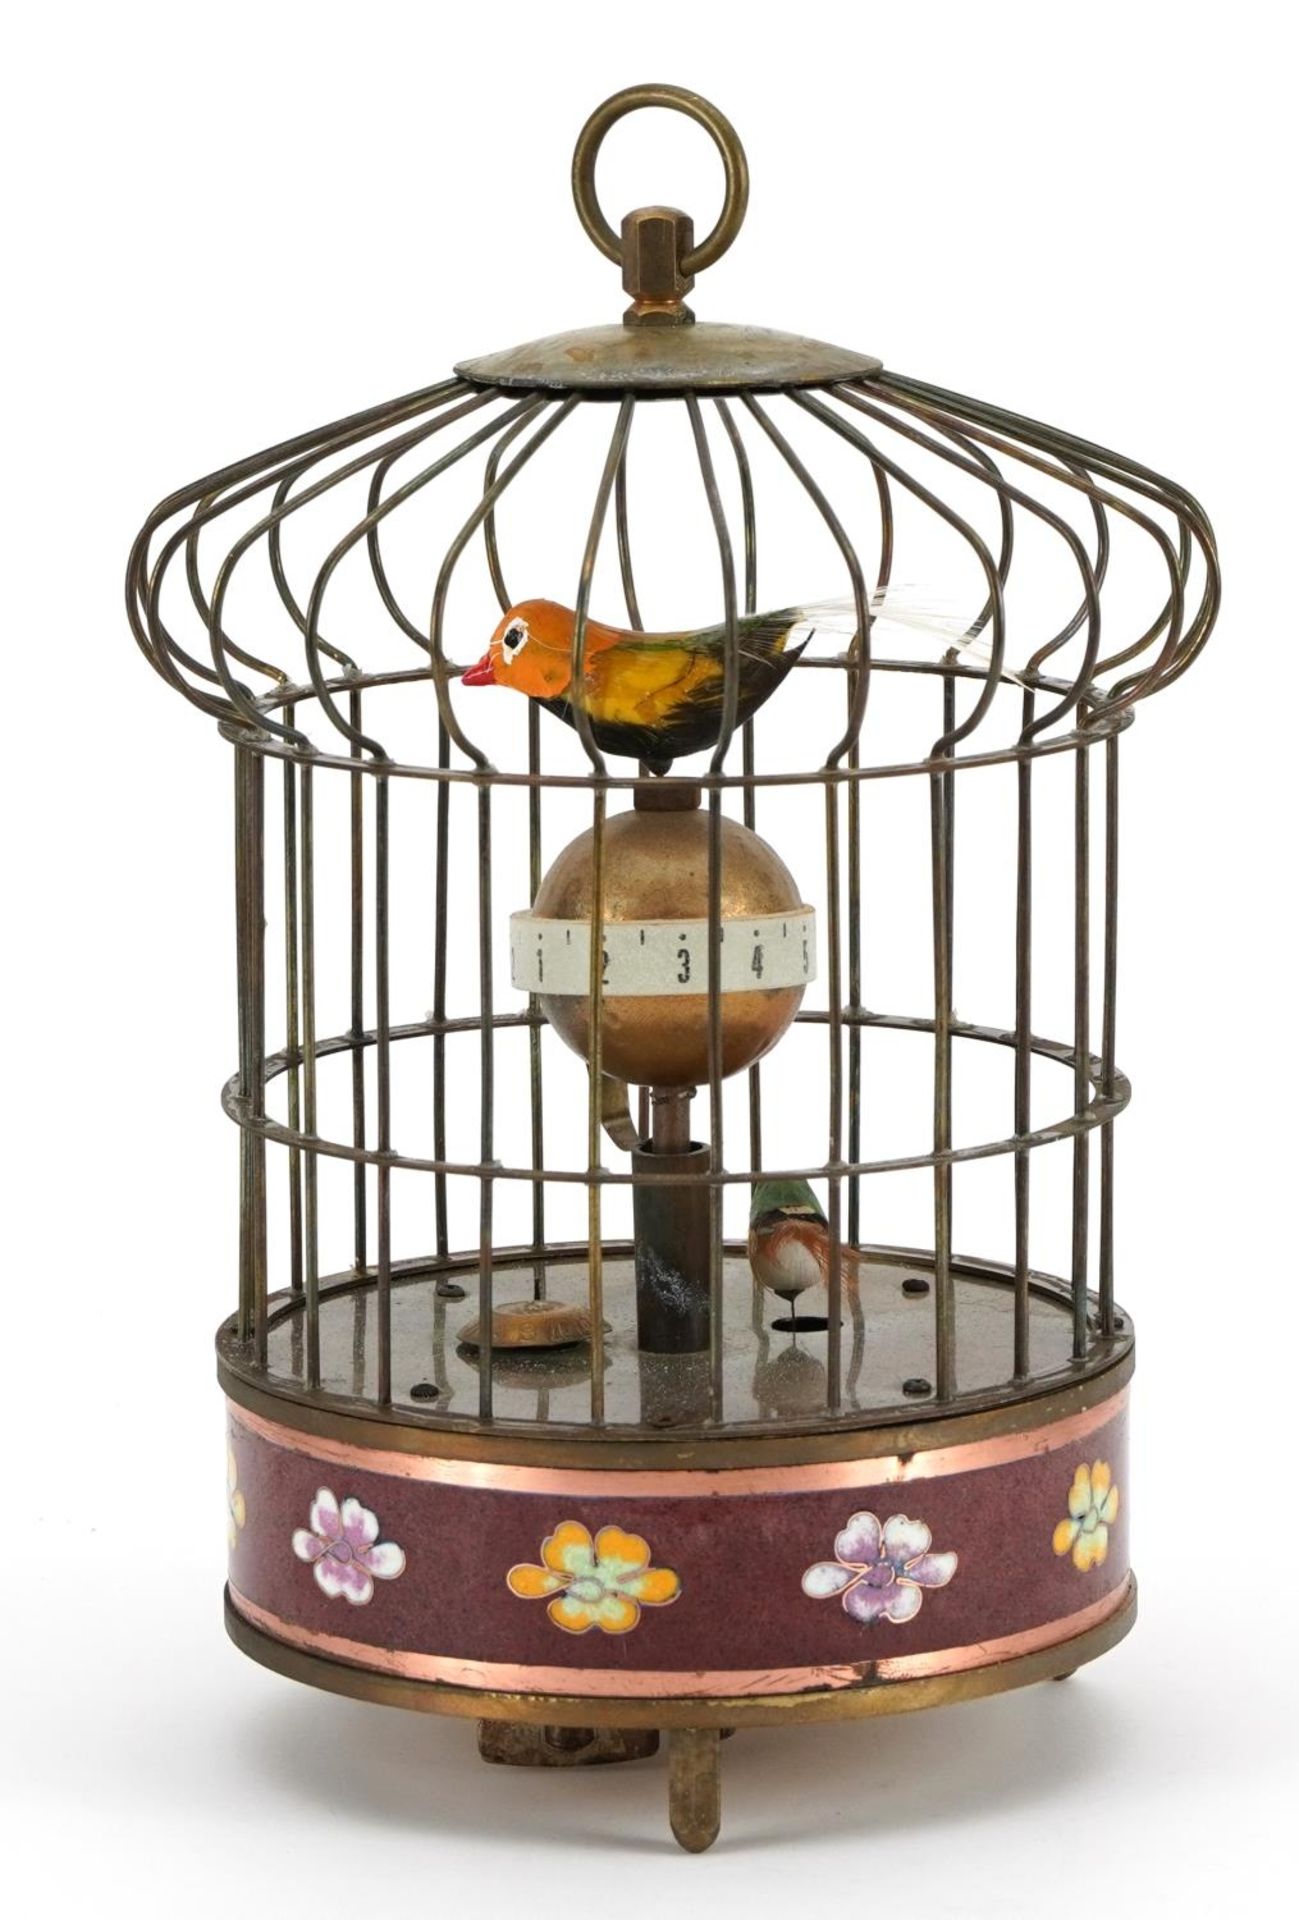 Brass and cloisonne clockwork automaton birdcage with alarm clock, 19.5cm high - Image 2 of 3